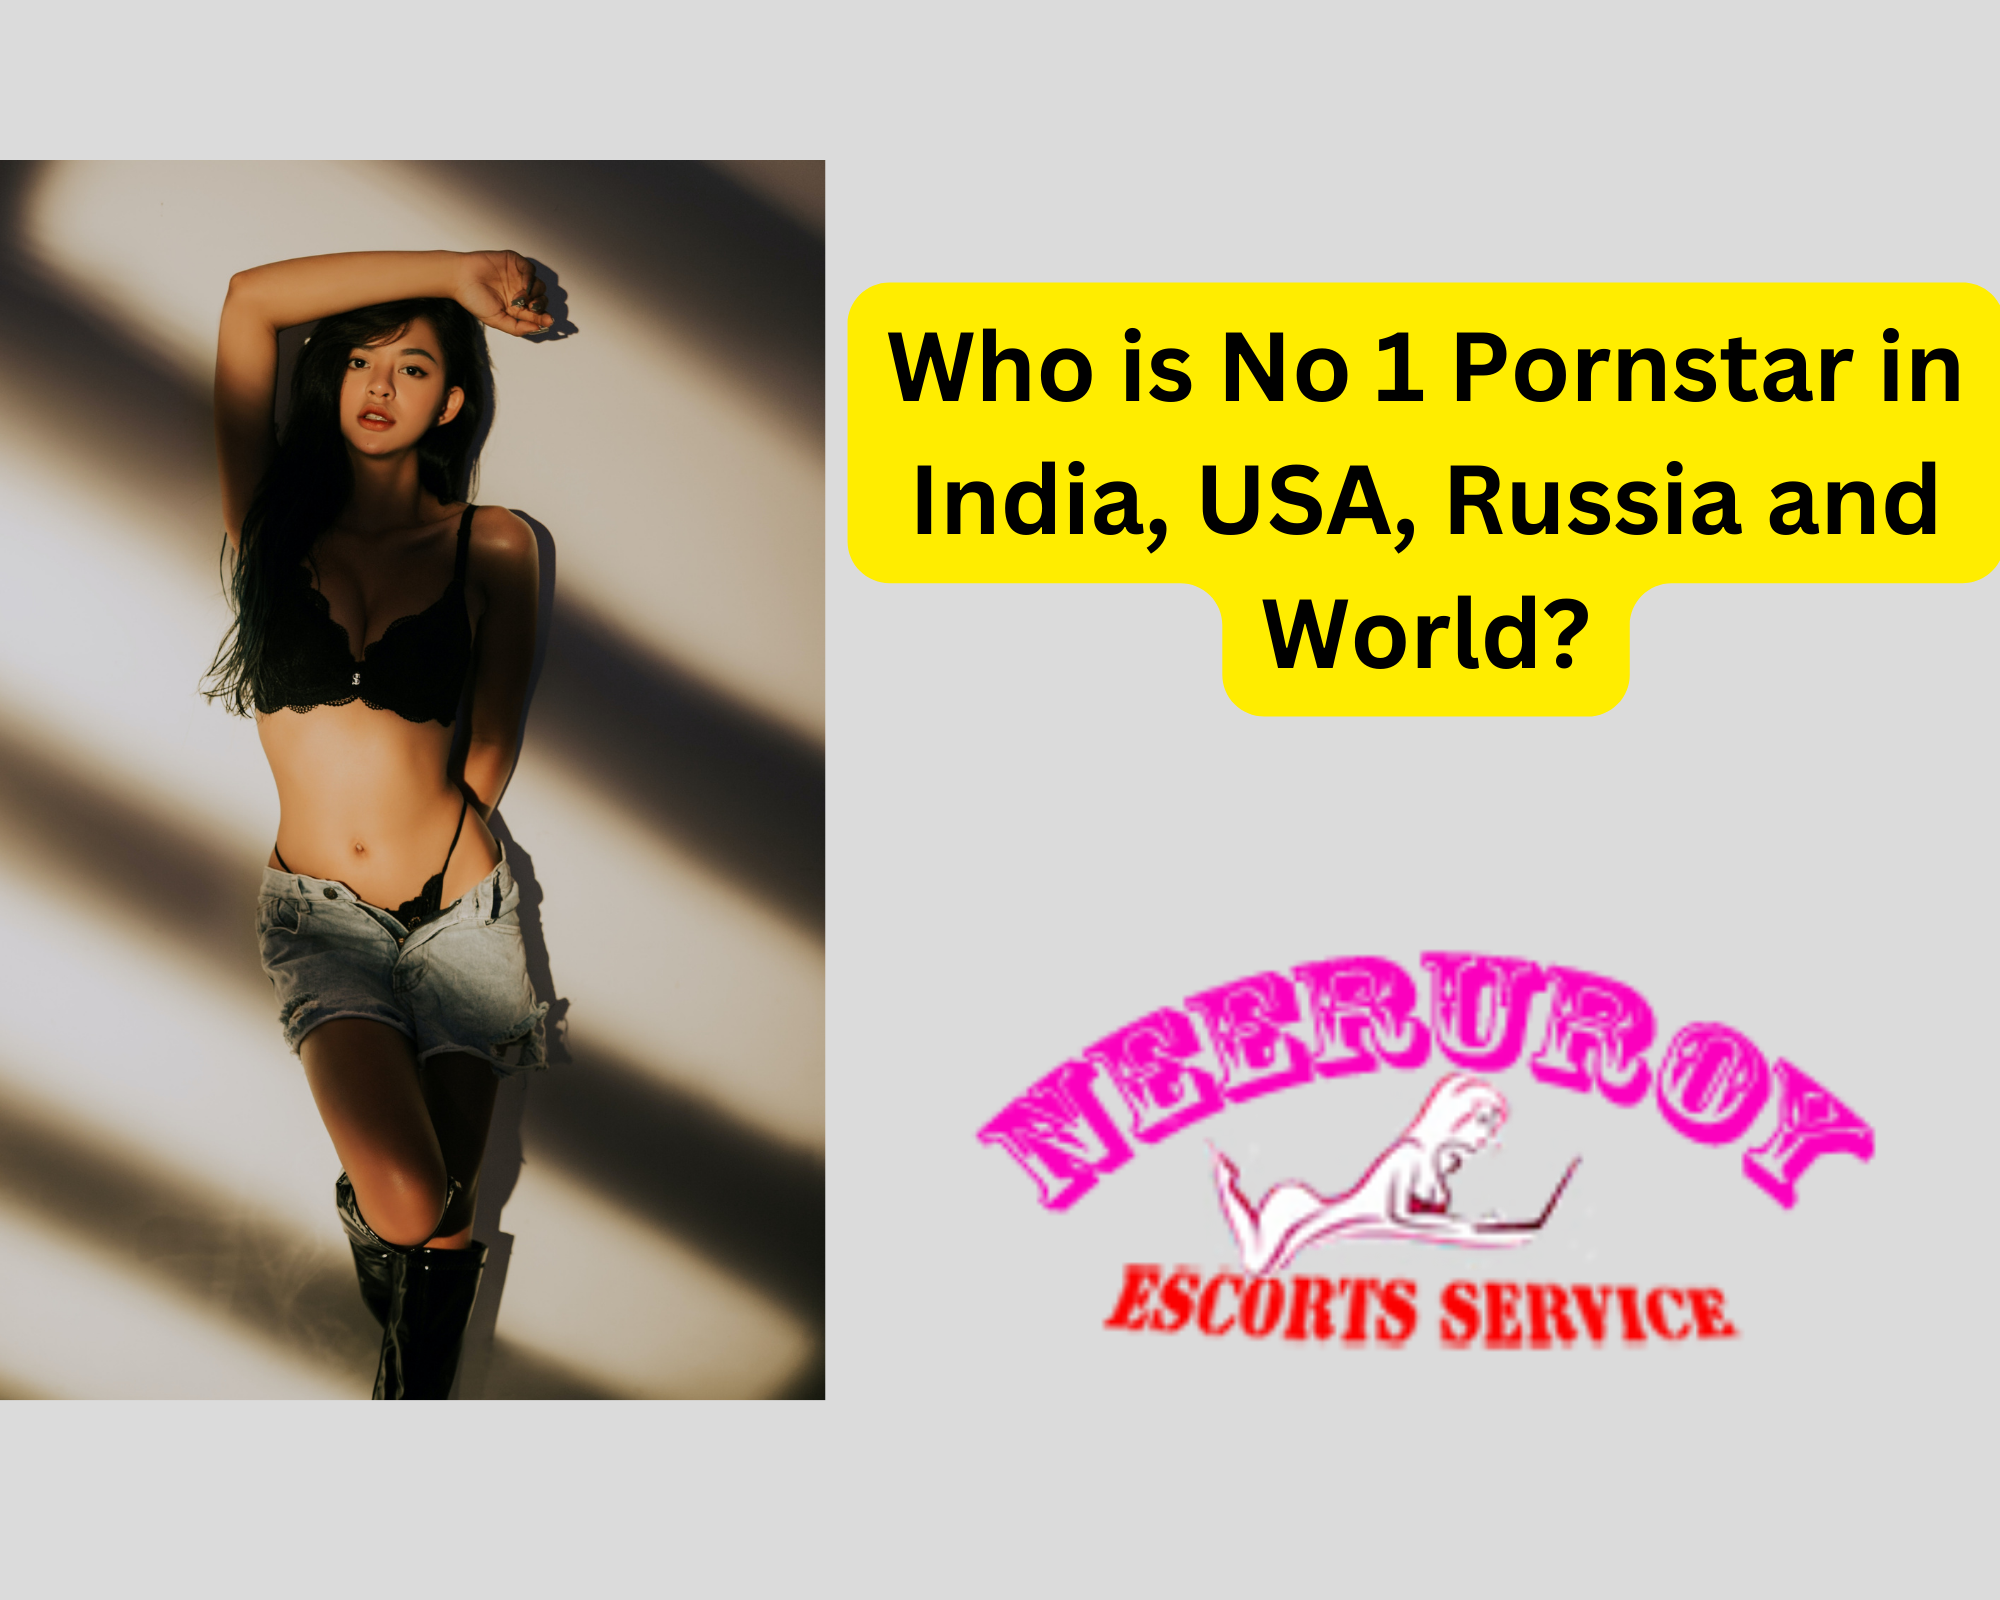 Who is Number 1 Pornstar in India, USA, Russia and World?